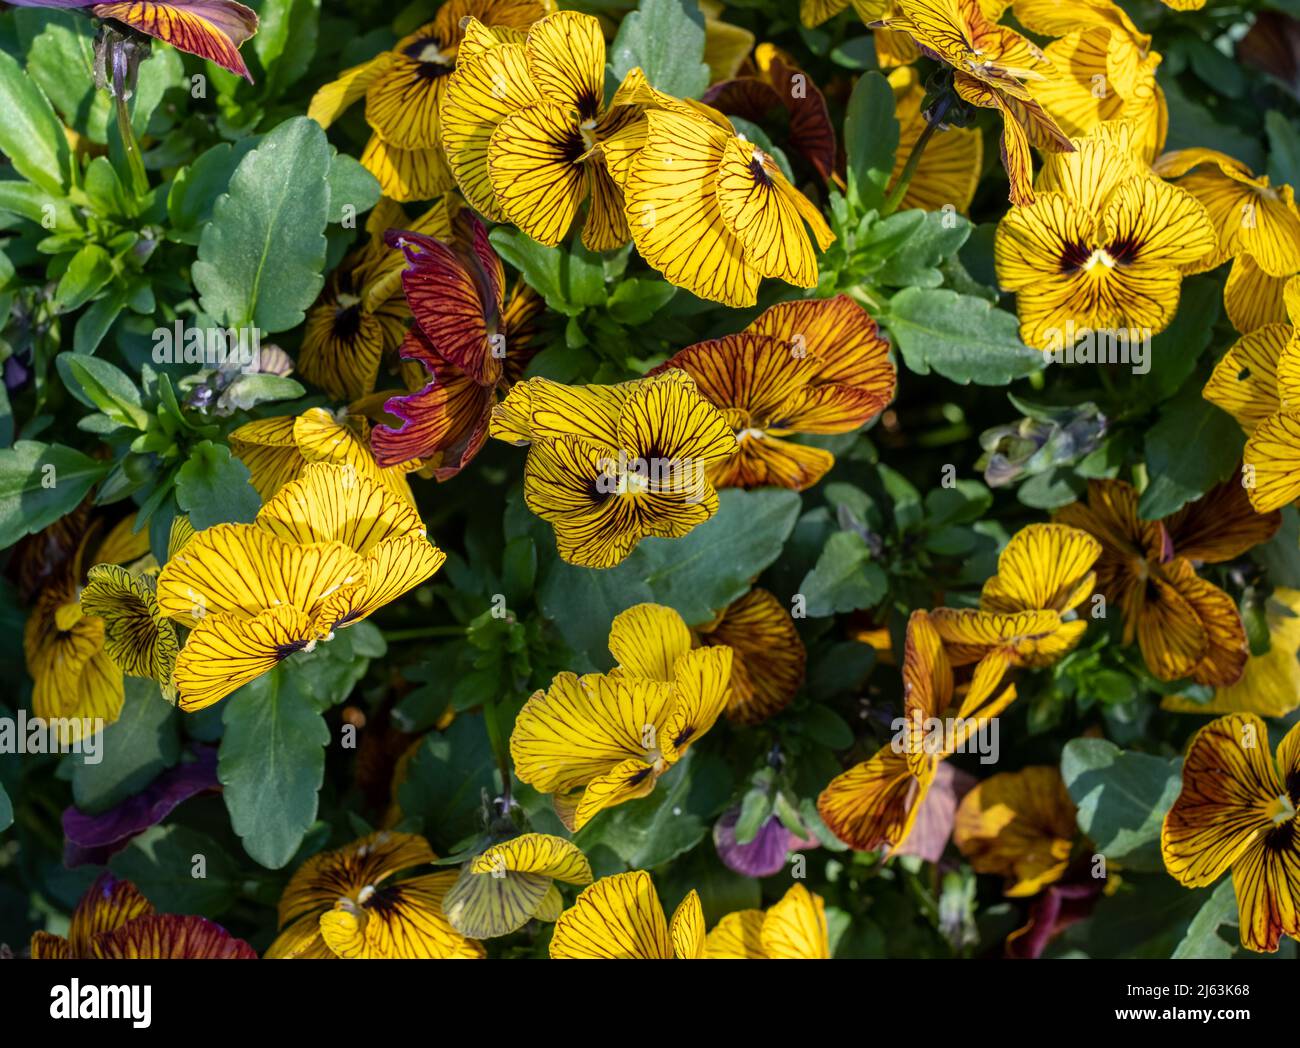 Terracotta flower pot filled with striped amber and yellow viola flowers by the name Tiger Eye. Photographed at RHS Wisley garden, Surrey UK Stock Photo